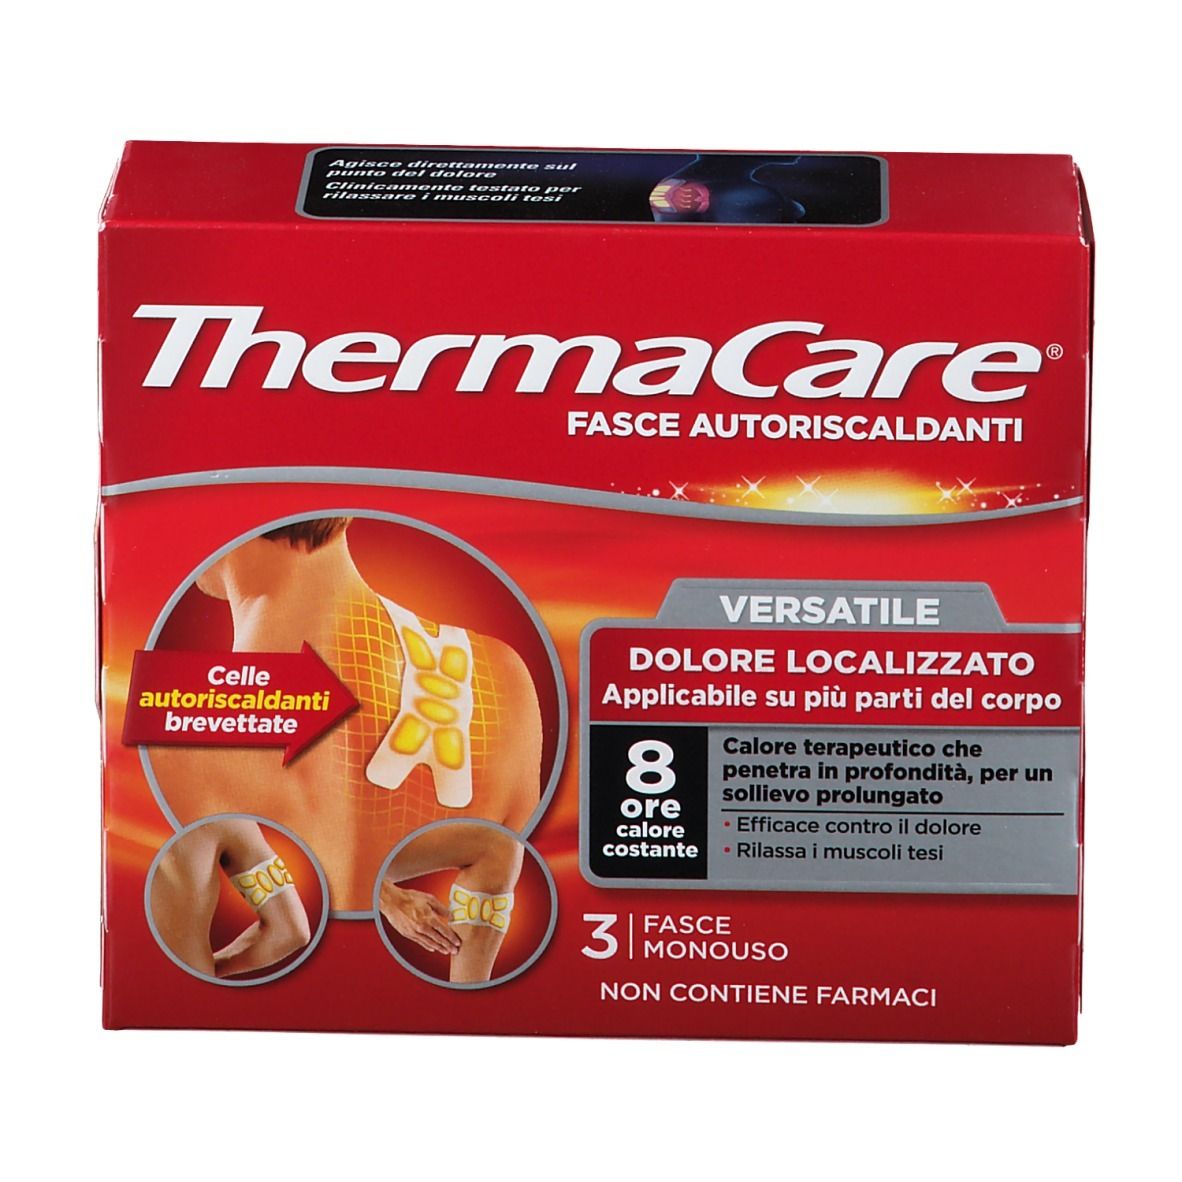 Thermacare® Flexible Use